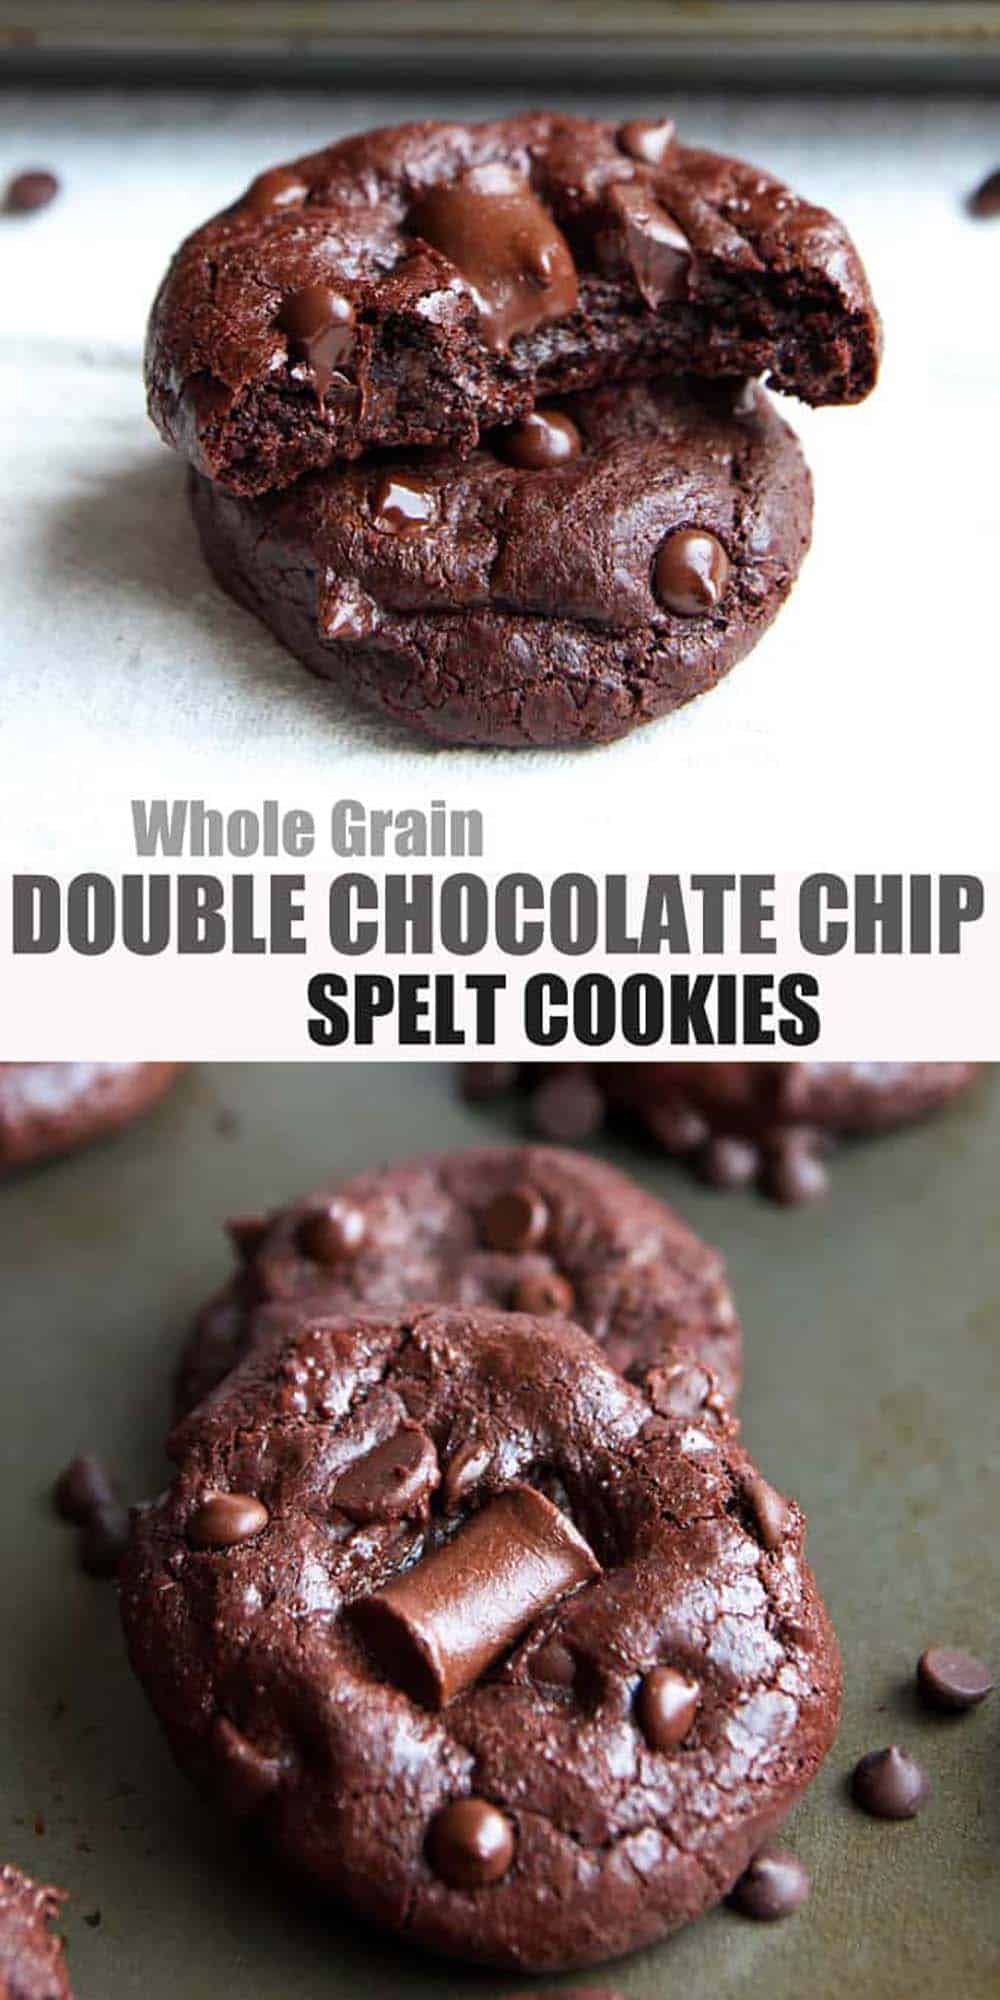 Double Chocolate Chip Cookies with Spelt Flour